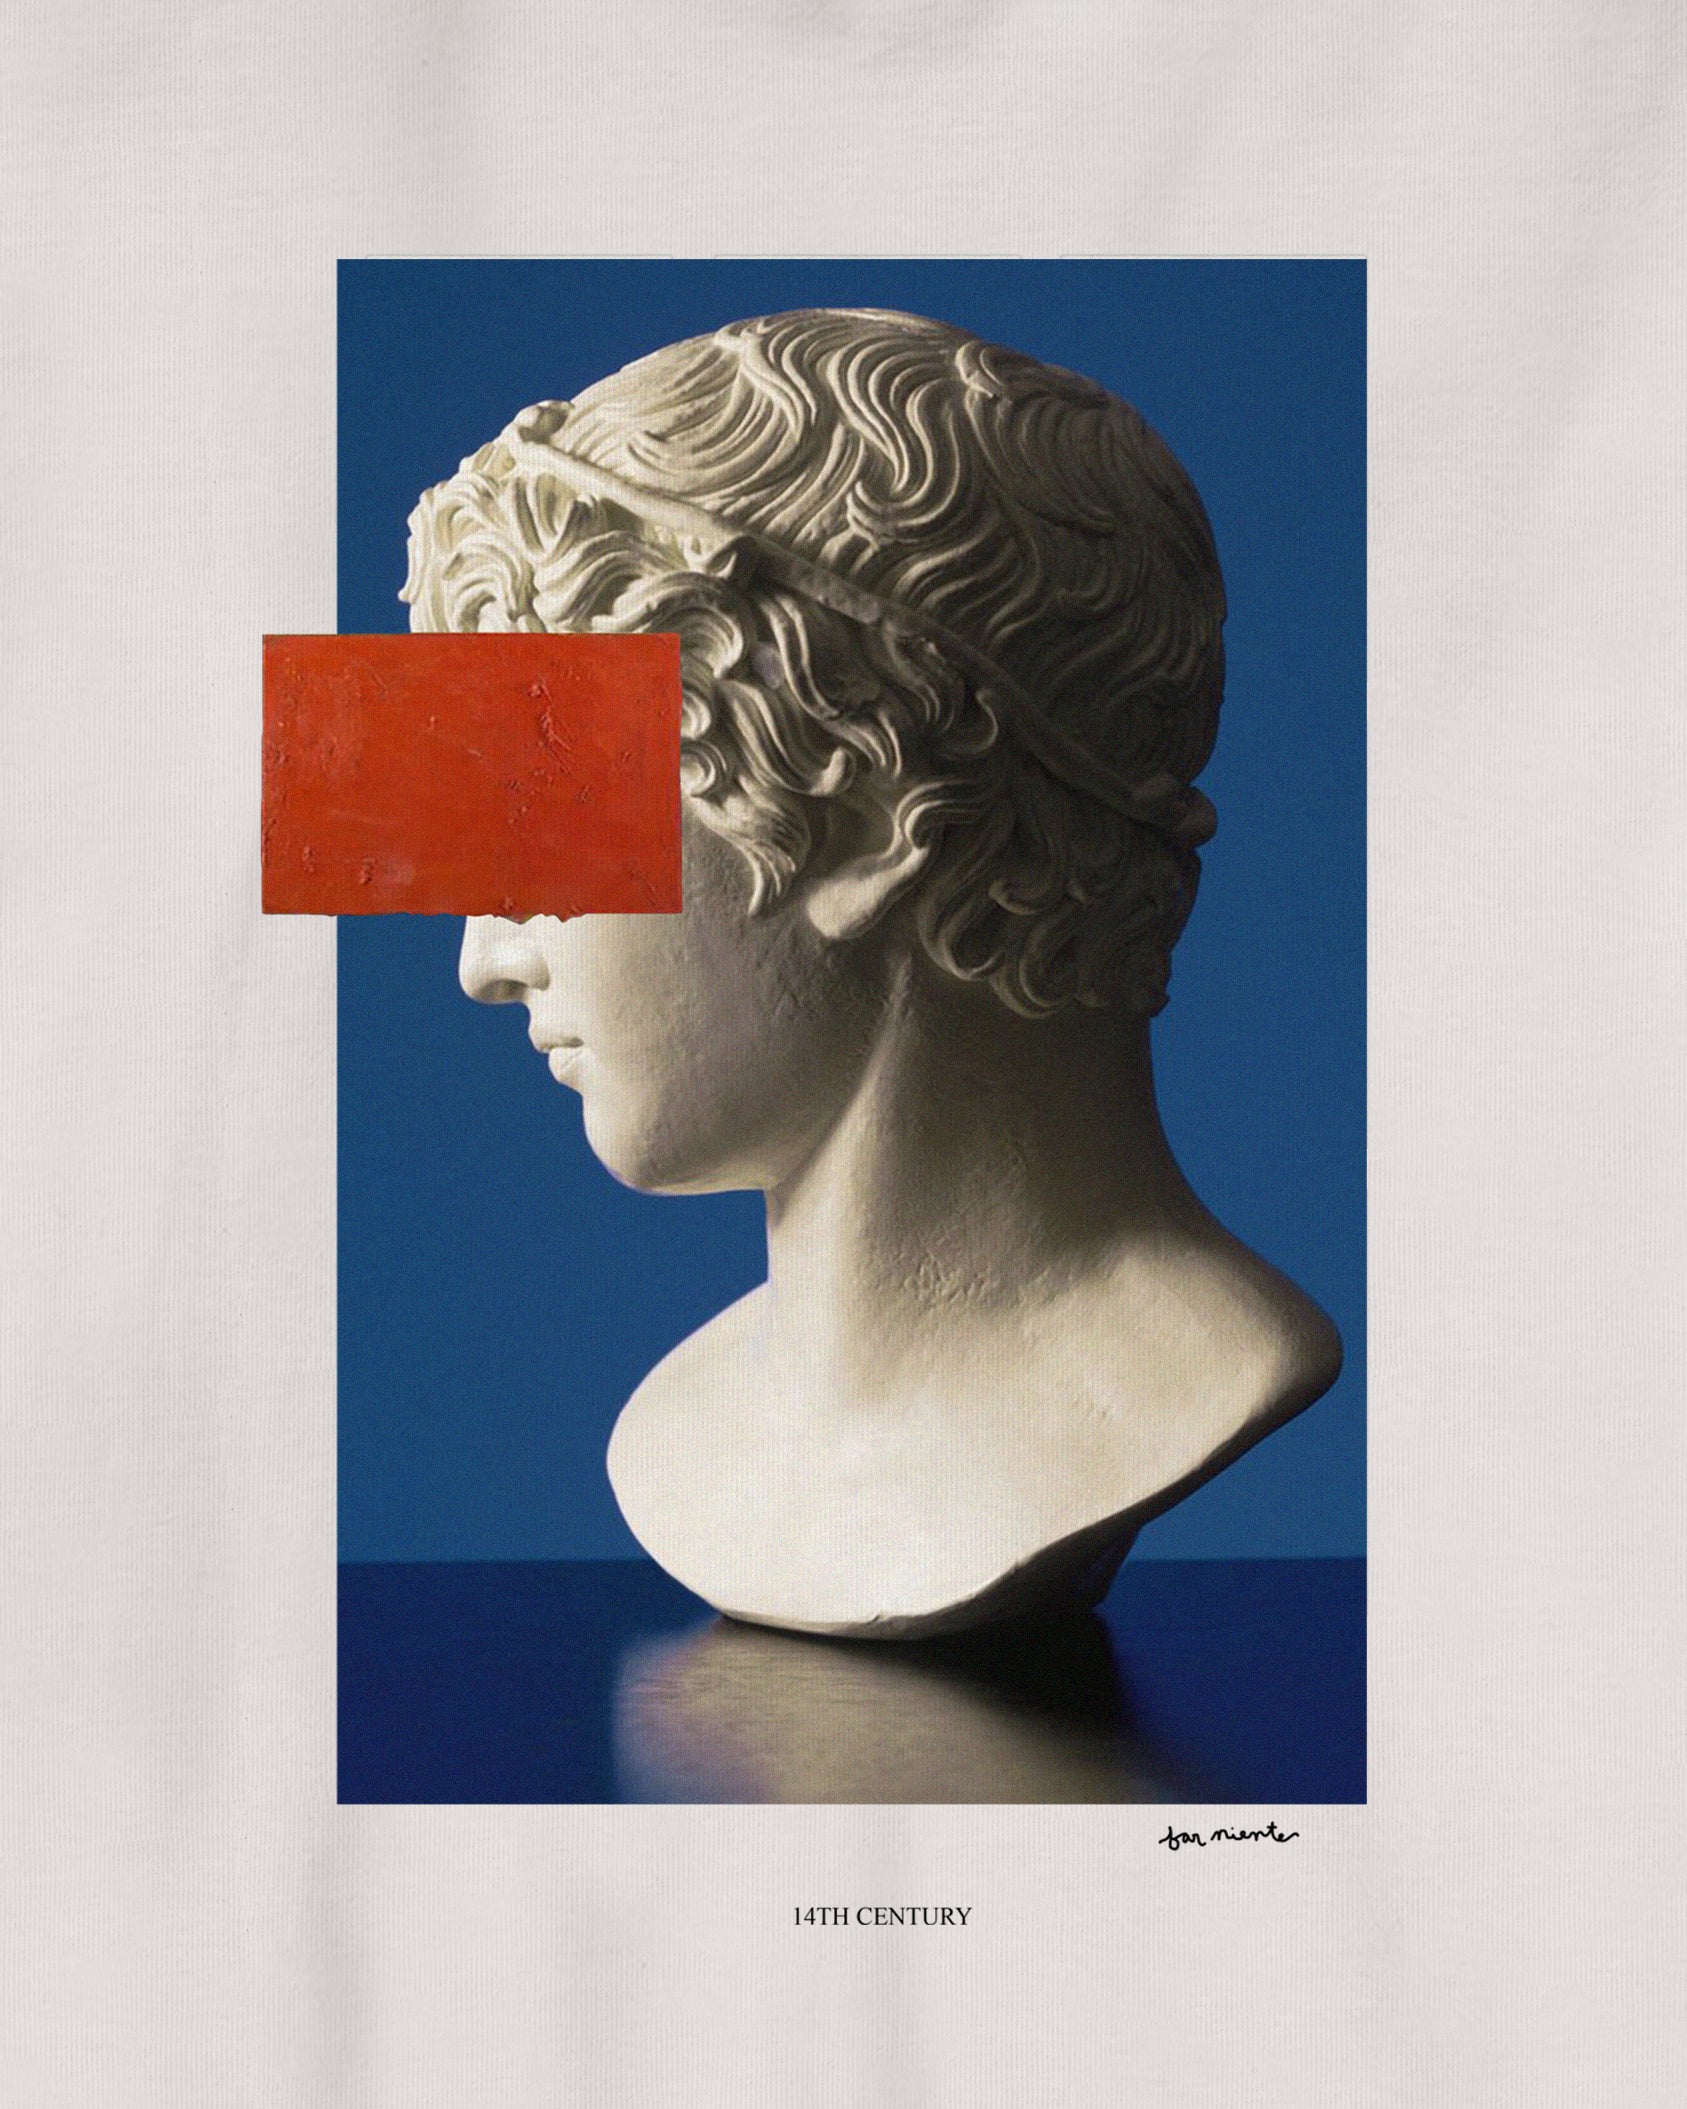 Cream / Off White/ Ceramic Organic Short Sleeve 100% Cotton Tee with graphic print of a classical Renaissance Sculpture with Expressionist red square  Renaissance Art Movement.